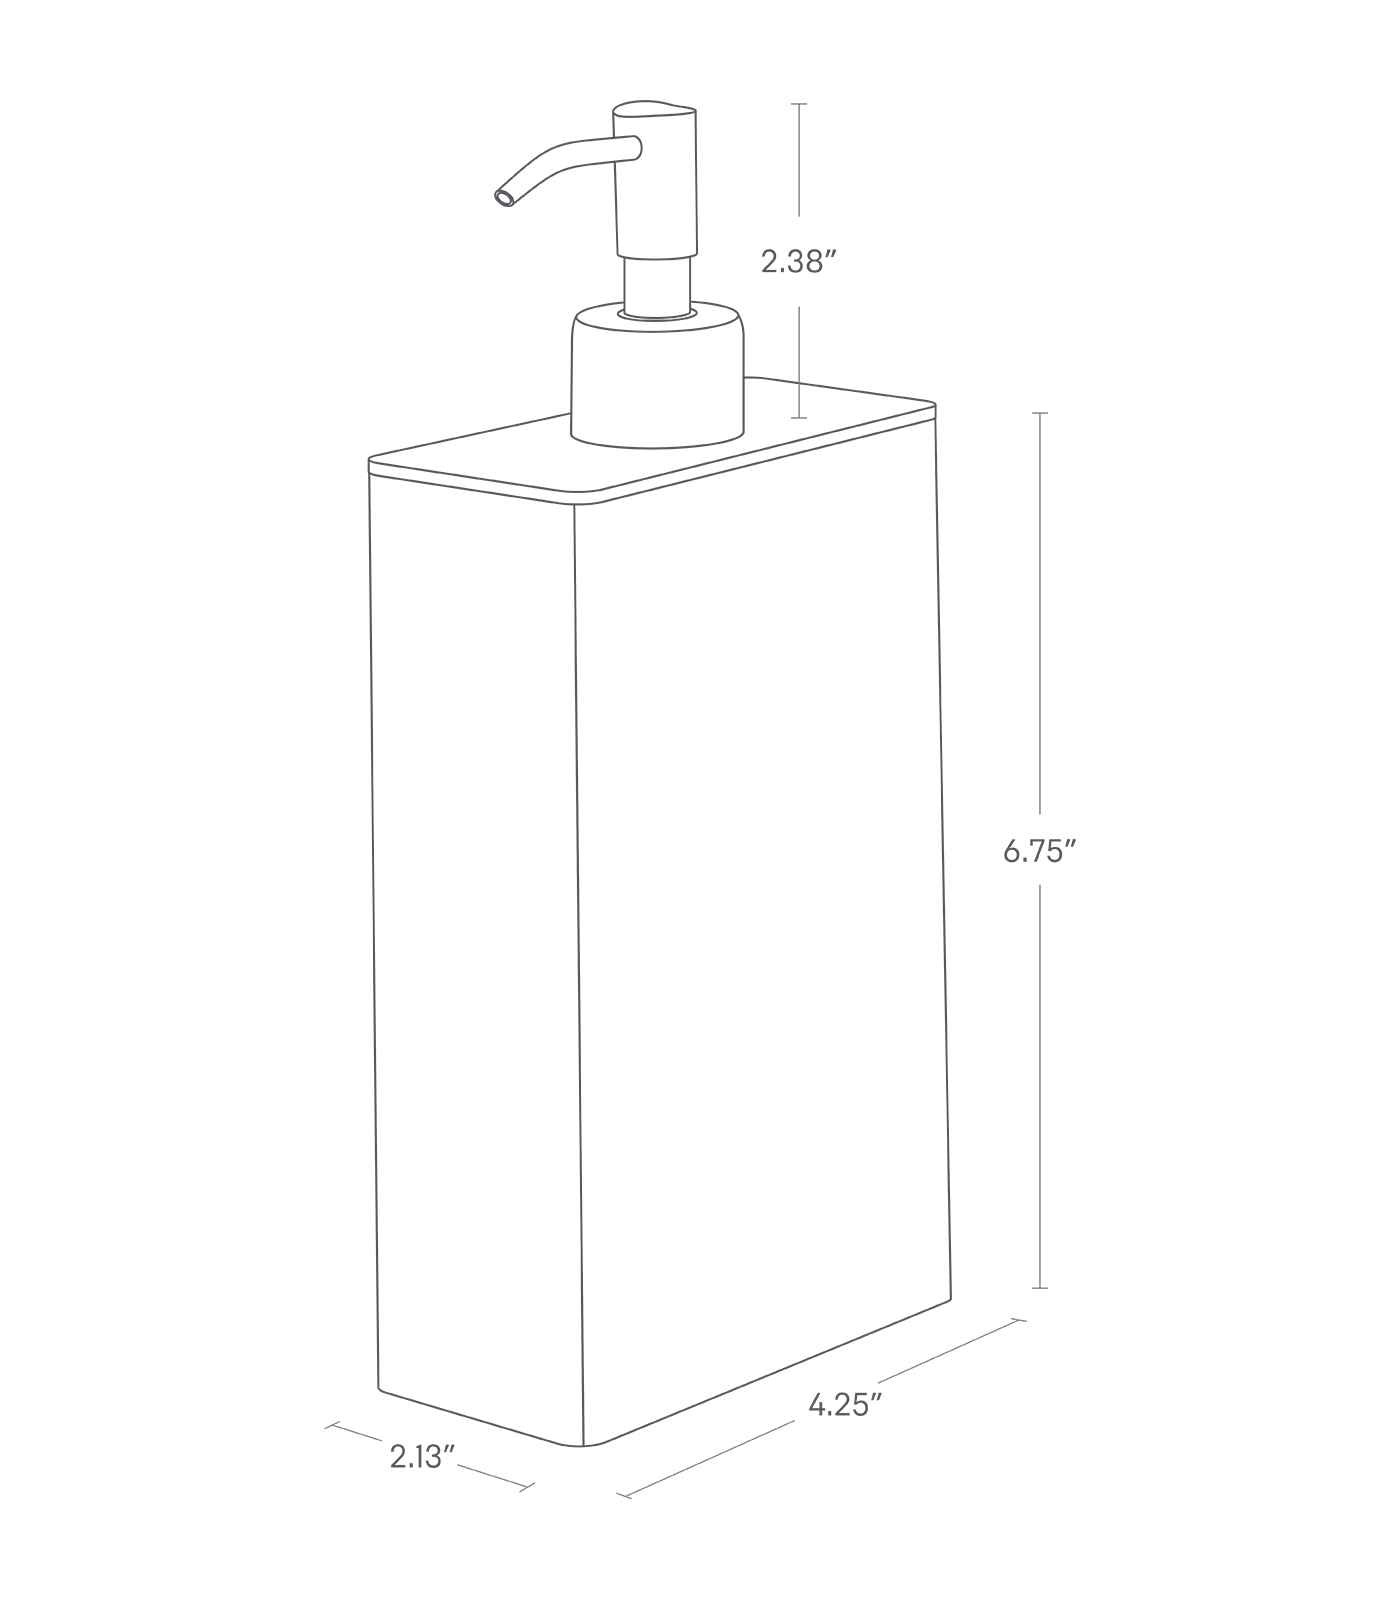 Dimension image for Rectangle Shower Dispenser showing container height of 6.75